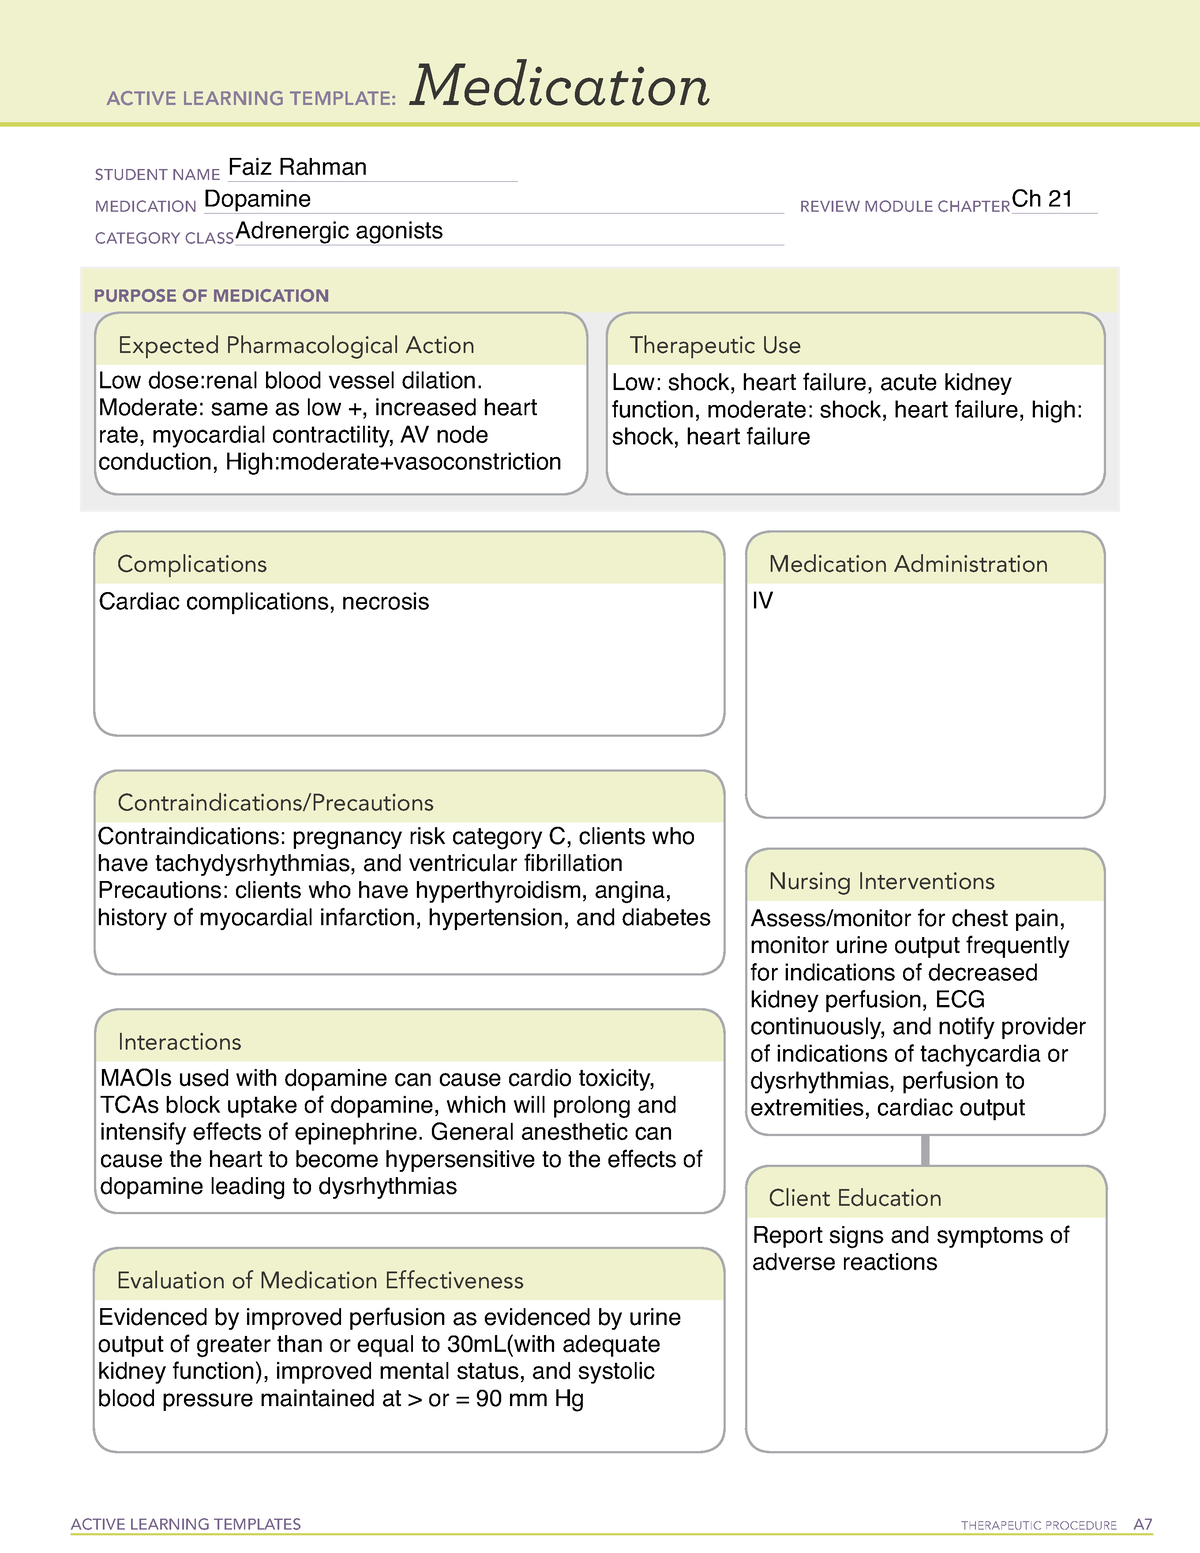 Dopamine Drug Template ACTIVE LEARNING TEMPLATES THERAPEUTIC